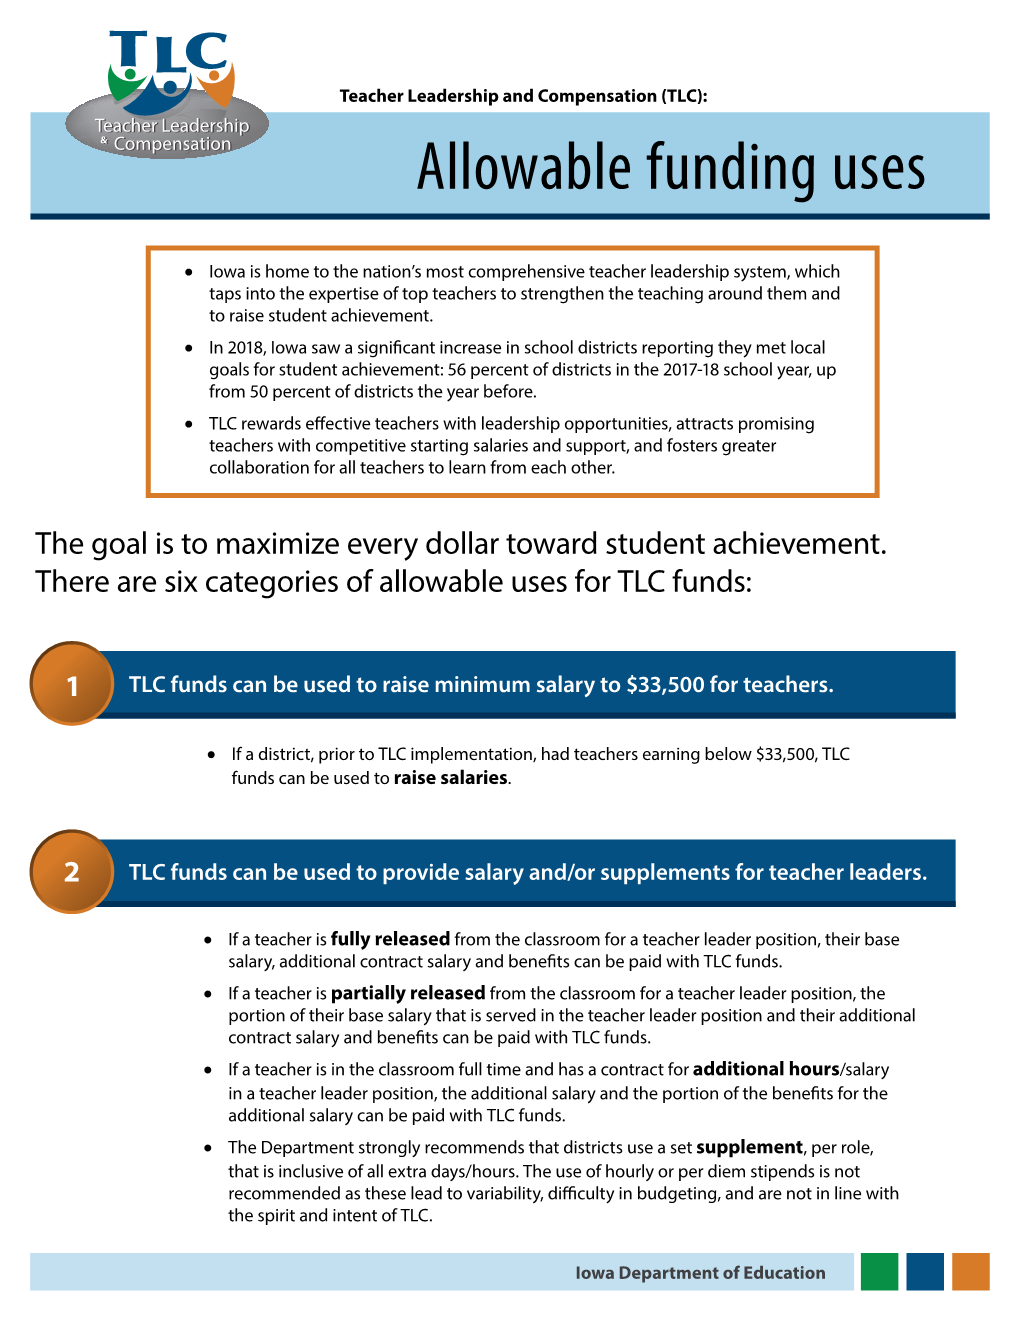 TLC Allowable Funding Uses